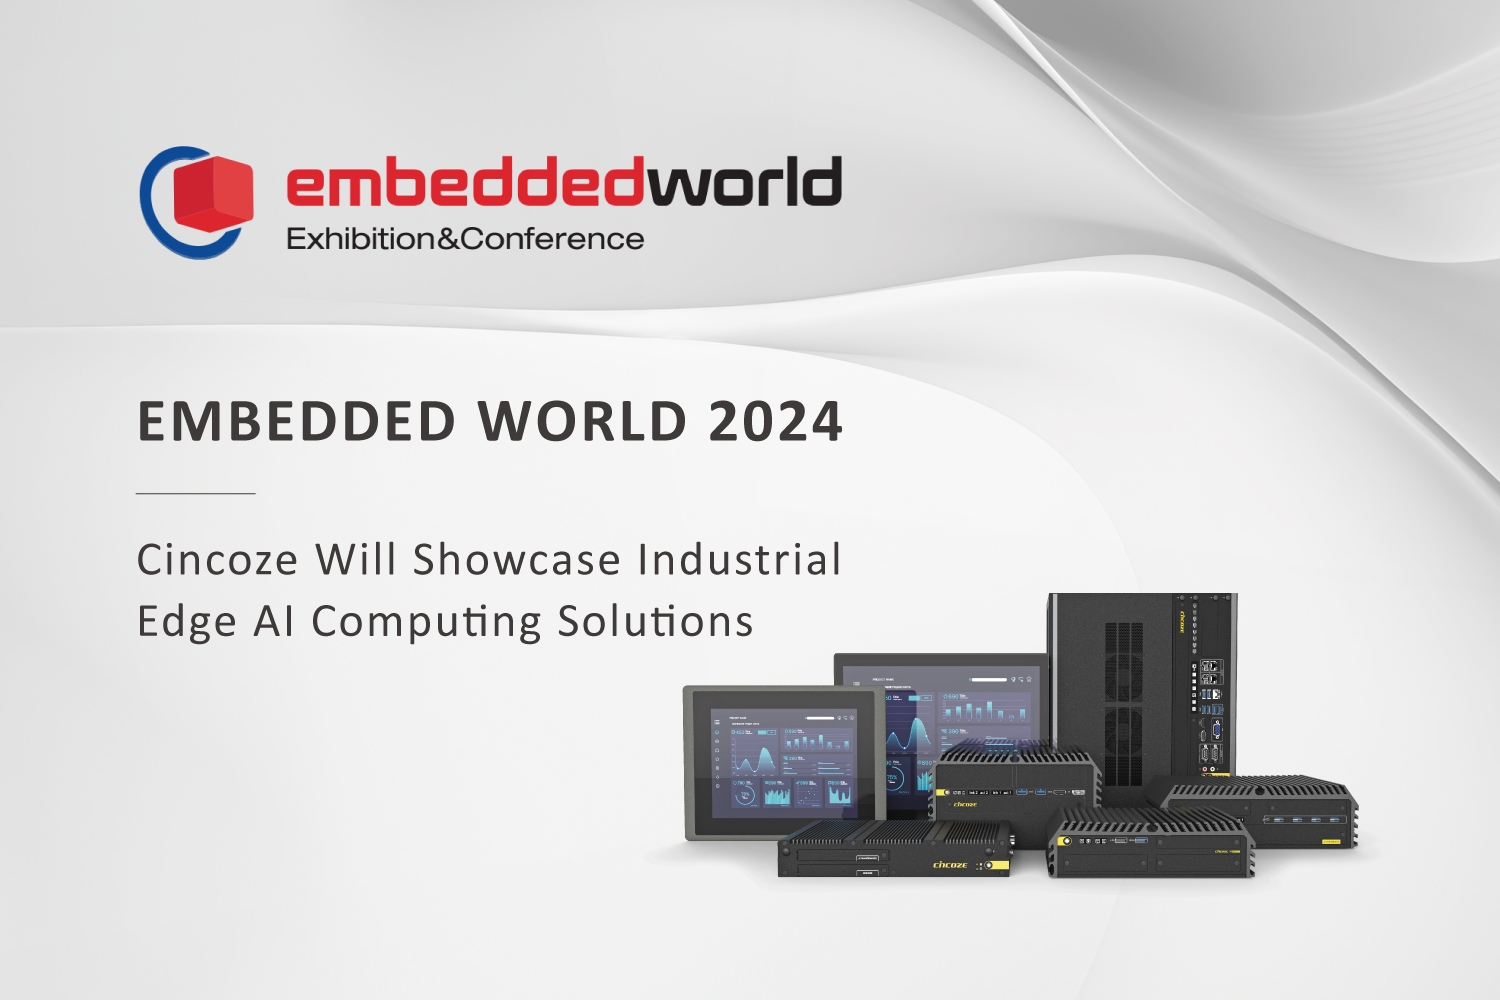 Embedded World 2024 — Cincoze Will Showcase Industrial Edge AI Computing Solutions